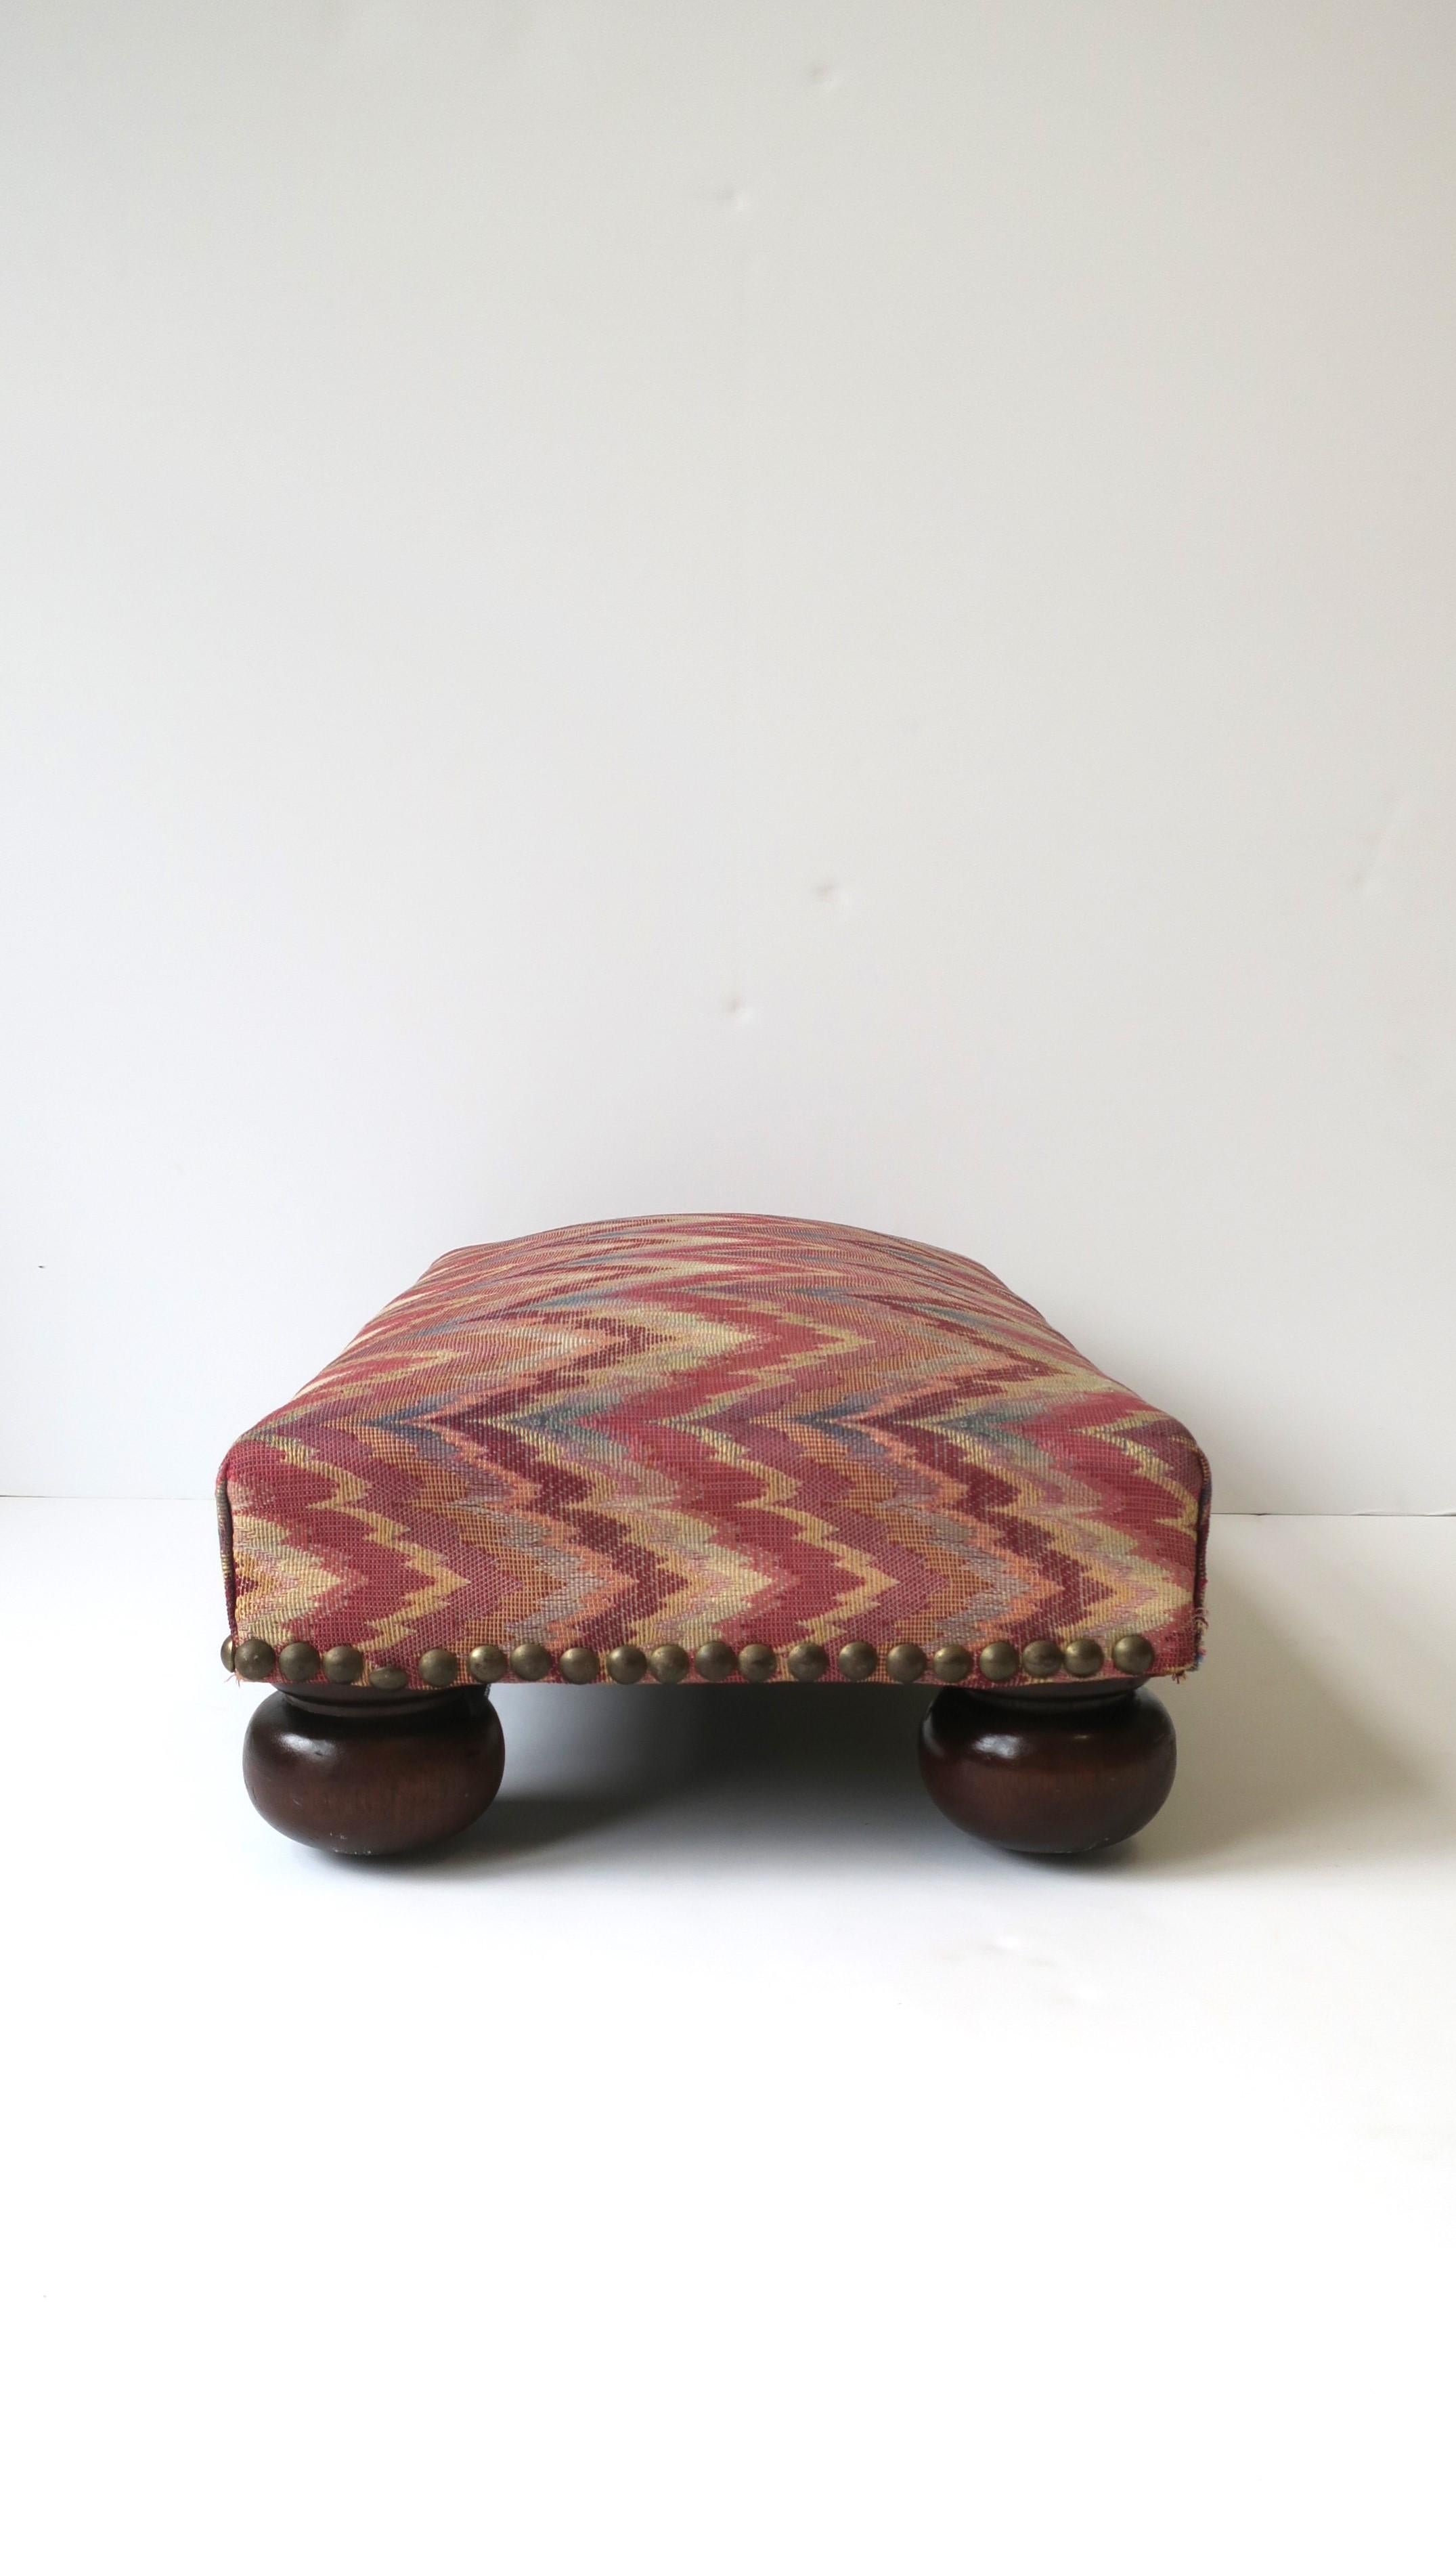 Footstool Bun Feet Schumacher Flamestitch Upholstery Nail Head Design In Good Condition For Sale In New York, NY